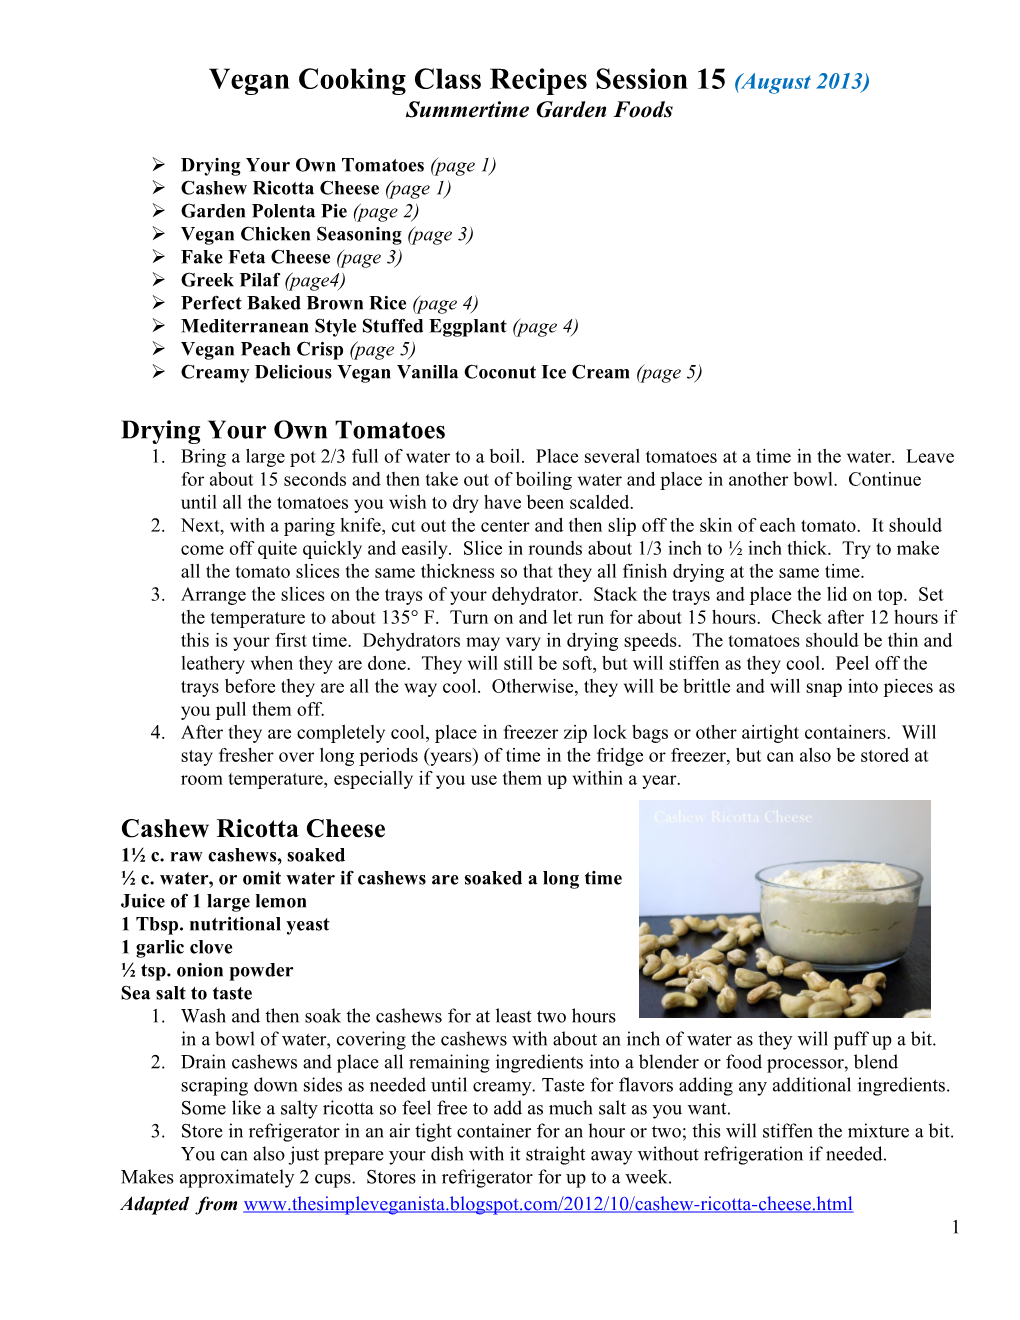 Cheese Sauce - Recipe Adapted from of These Ye May Freely Eat by Joann Rachor